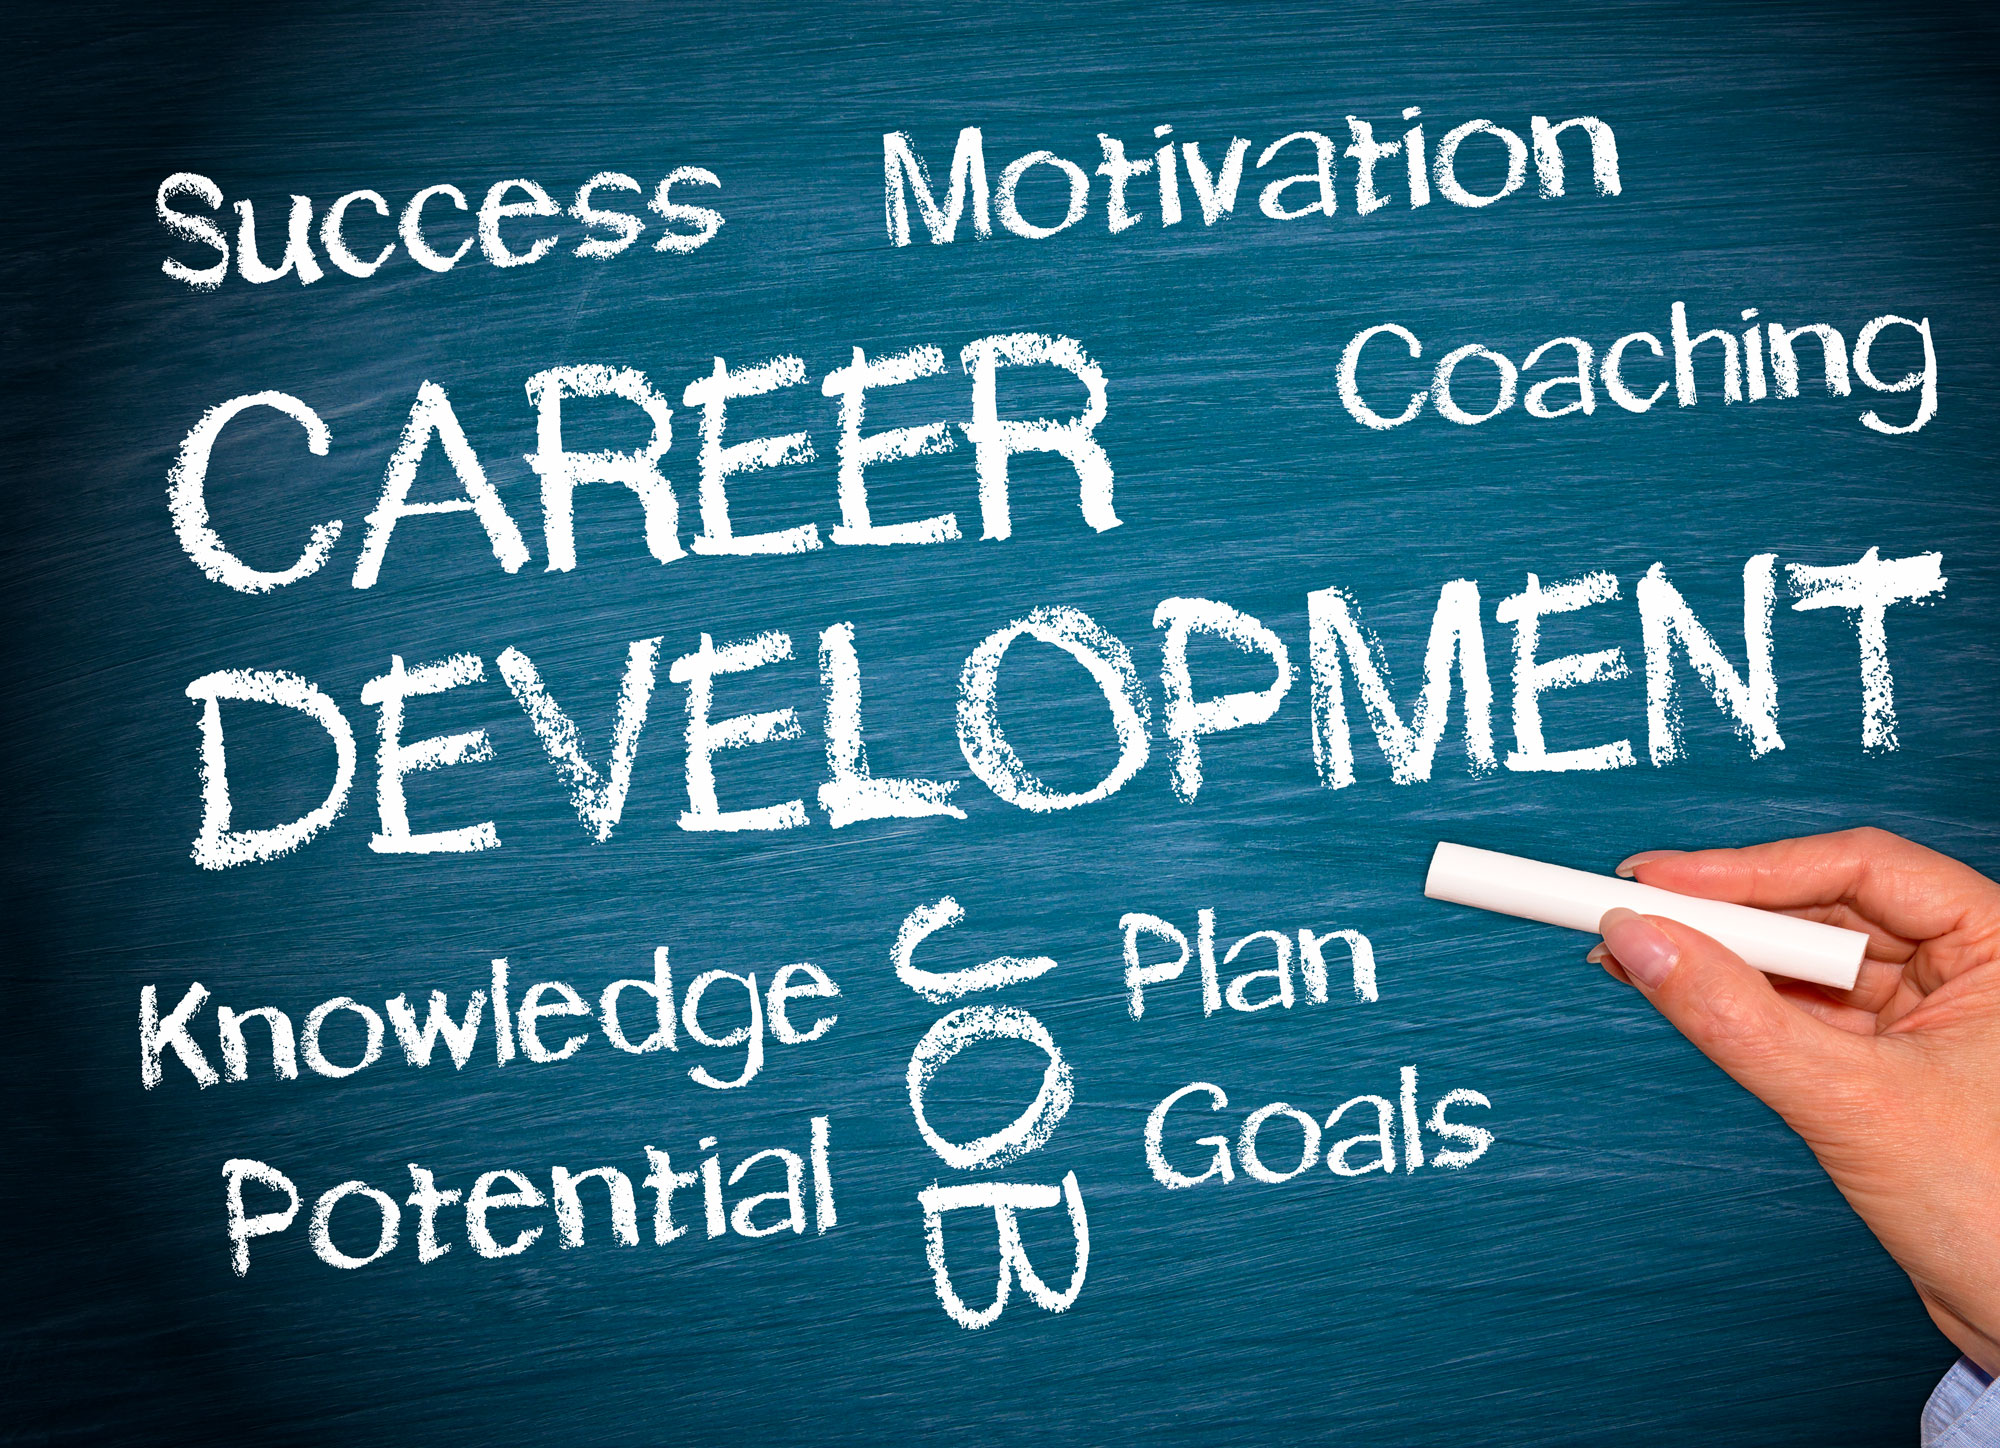 Read Want to Change Careers? See a Career Coach in Austin, TX!